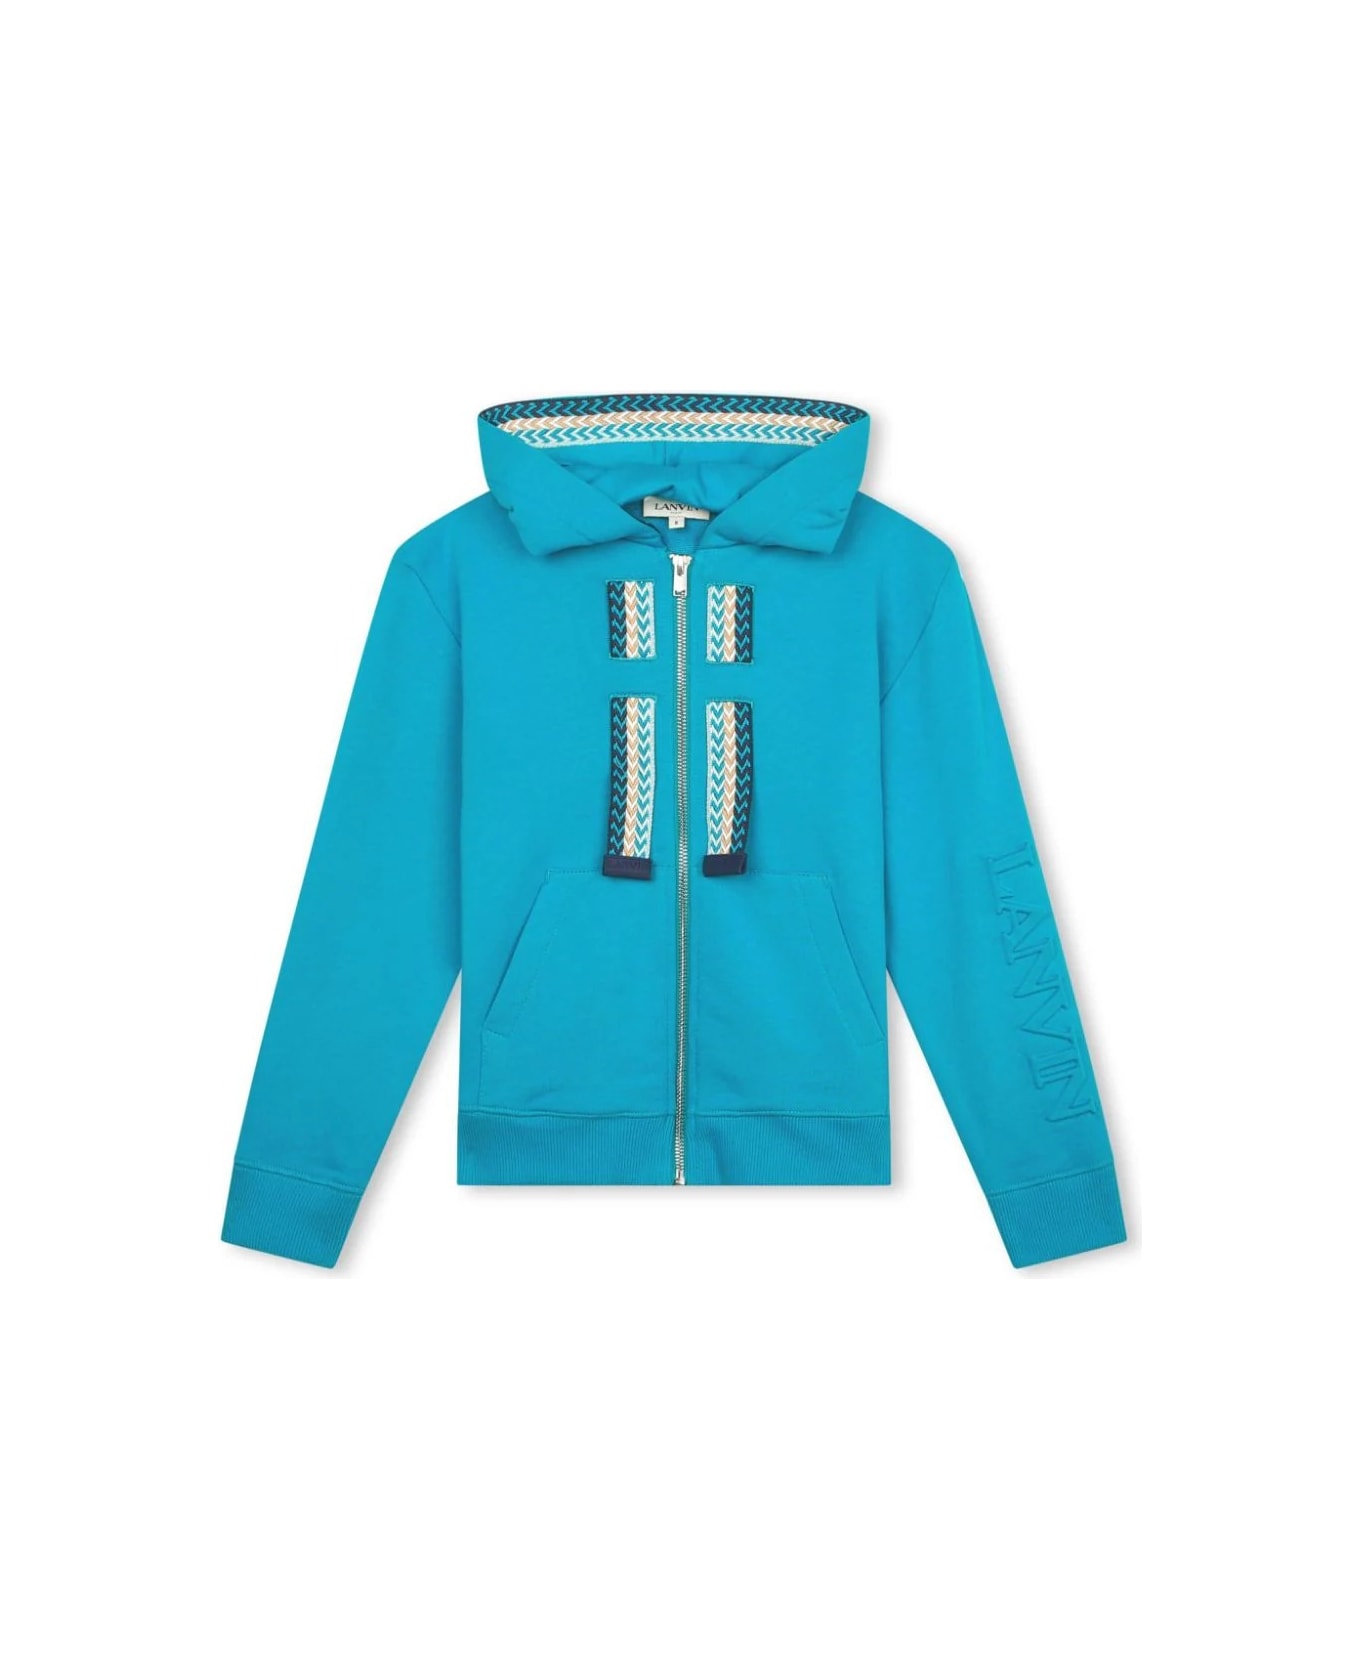 Lanvin Turquoise Hoodie With Logo And "curb" Motif - Blue ニットウェア＆スウェットシャツ